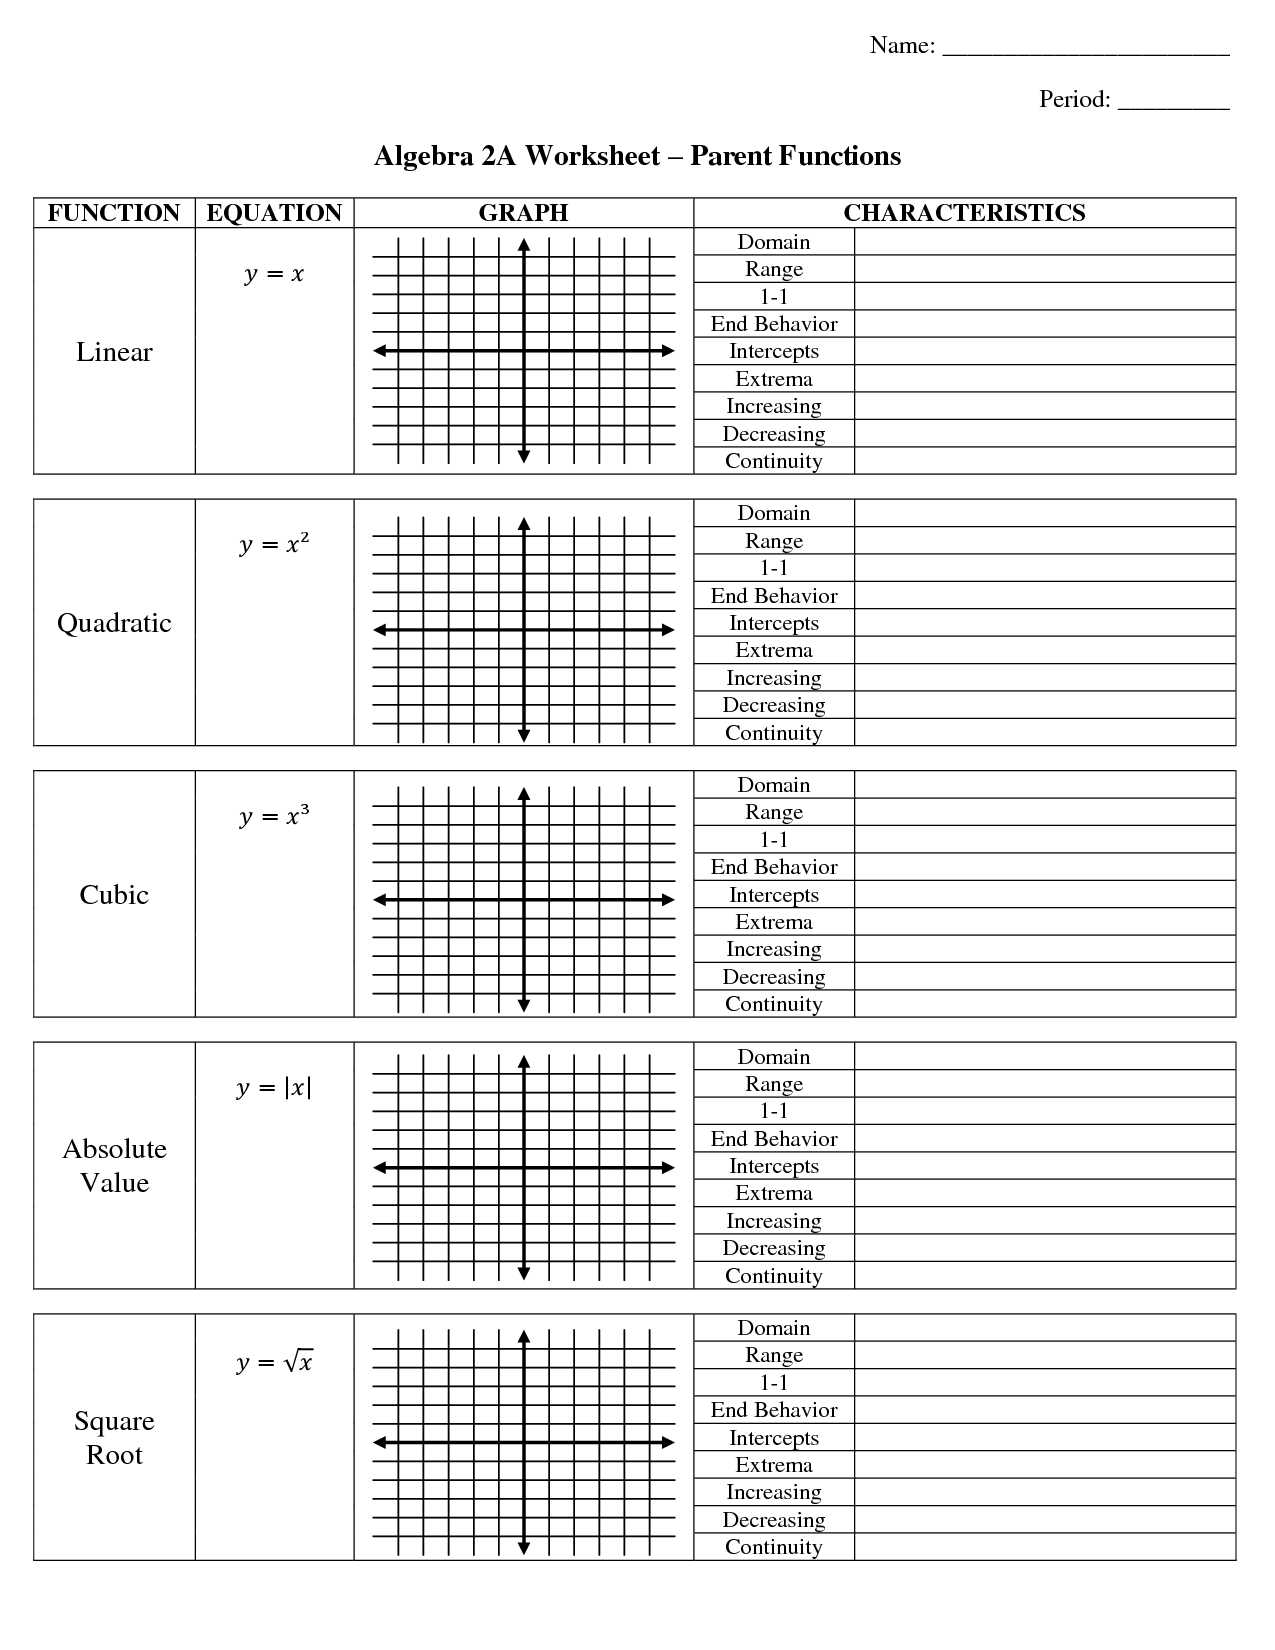 Domain and Range Worksheet 2 Answer Key Also Math Worksheets Dilationlation Maths Worksheet Rotation Reflectionth